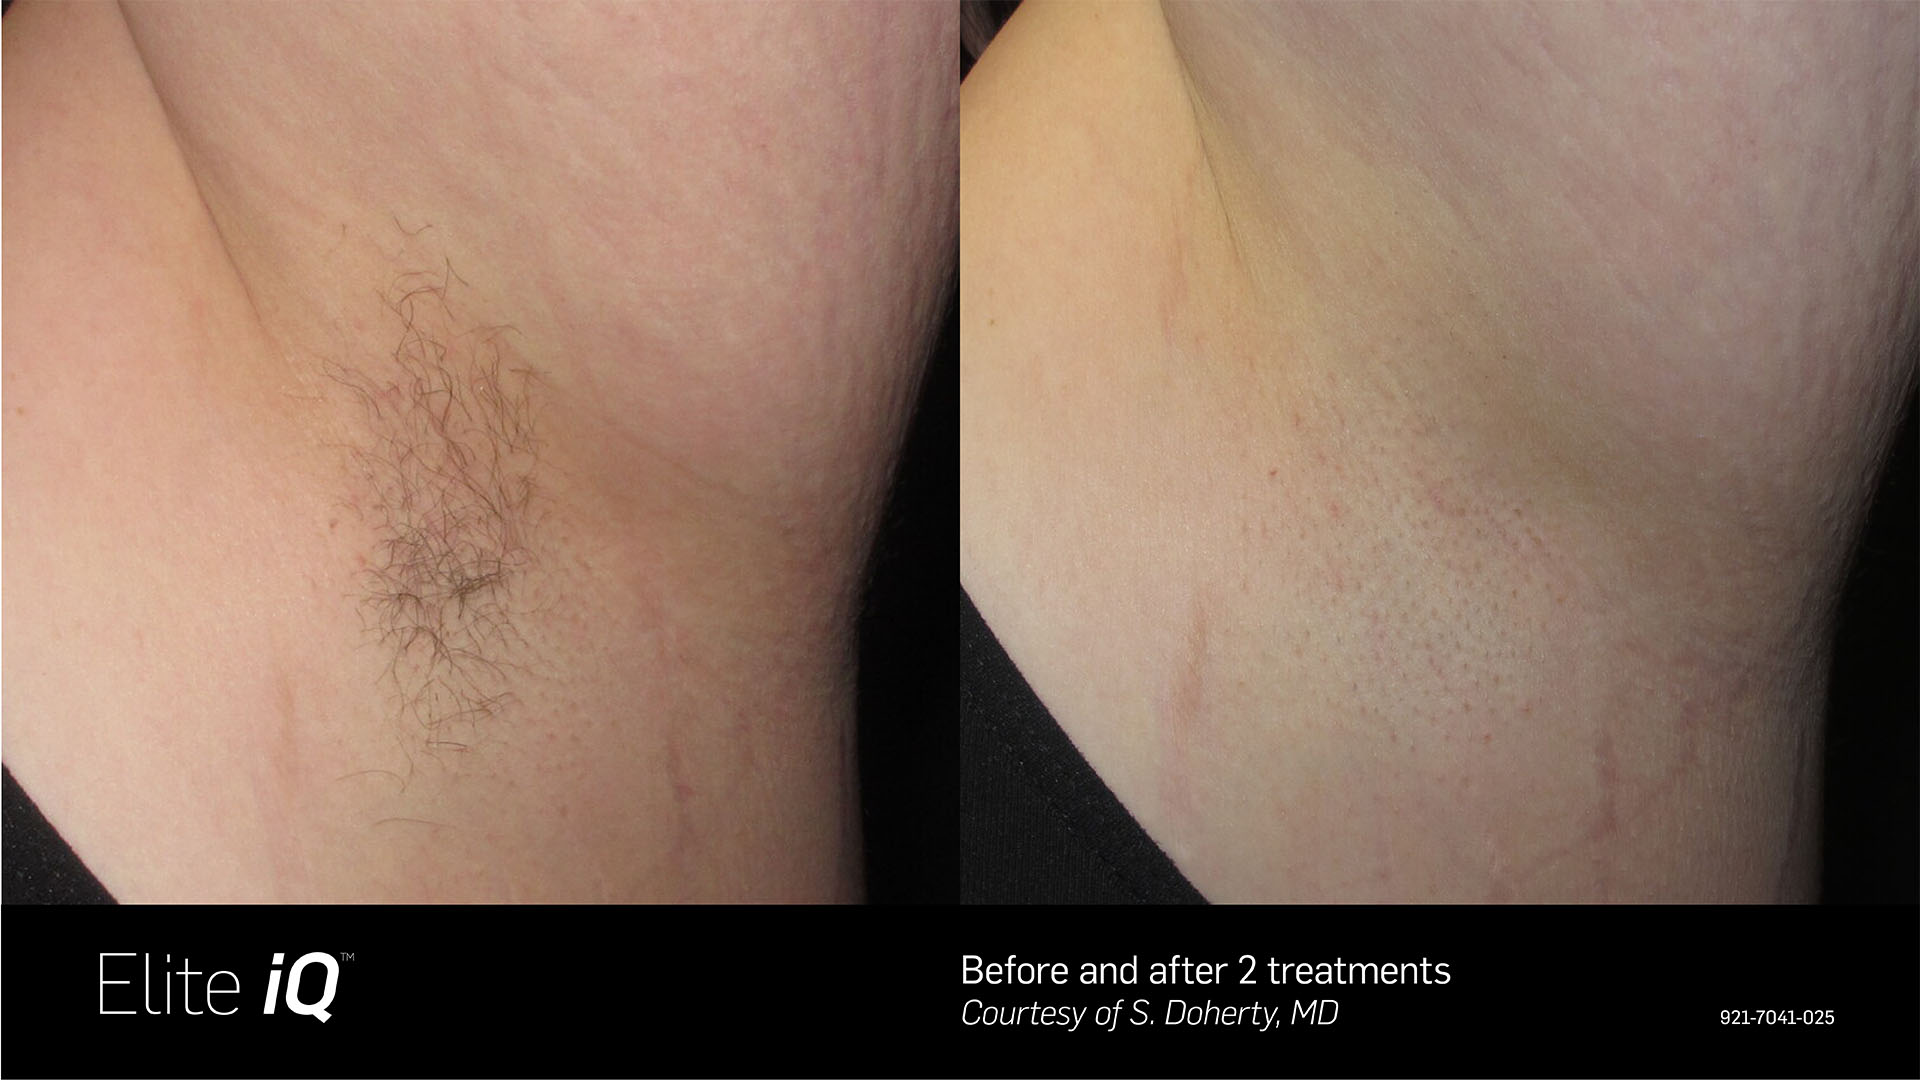 Before and after photo showing a woman's underarm with hair before and smooth, hairless skin after laser hair removal treatment with Elite IQ at Water's Edge Medical Clinic.